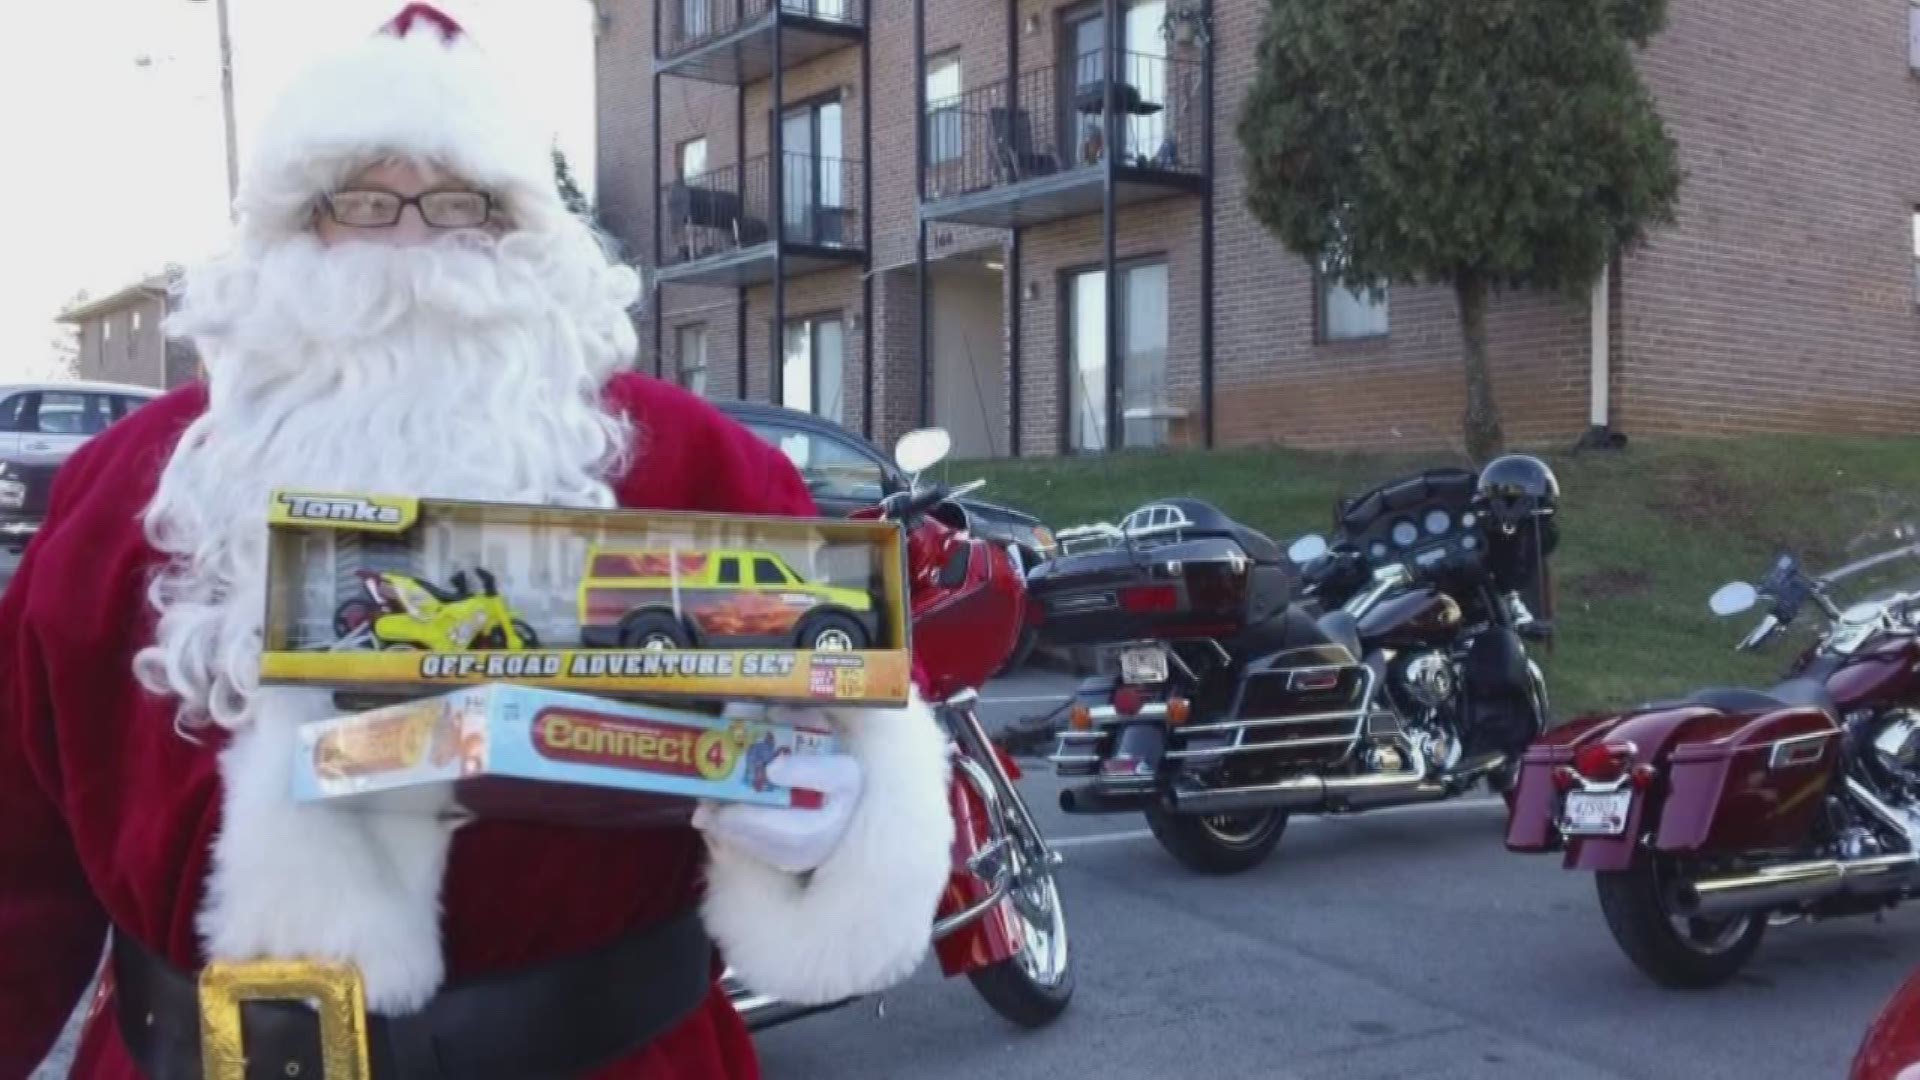 The HOG riders roll up to children's houses with Santa on a motorcycle pulled sleigh to deliver Christmas cheer.